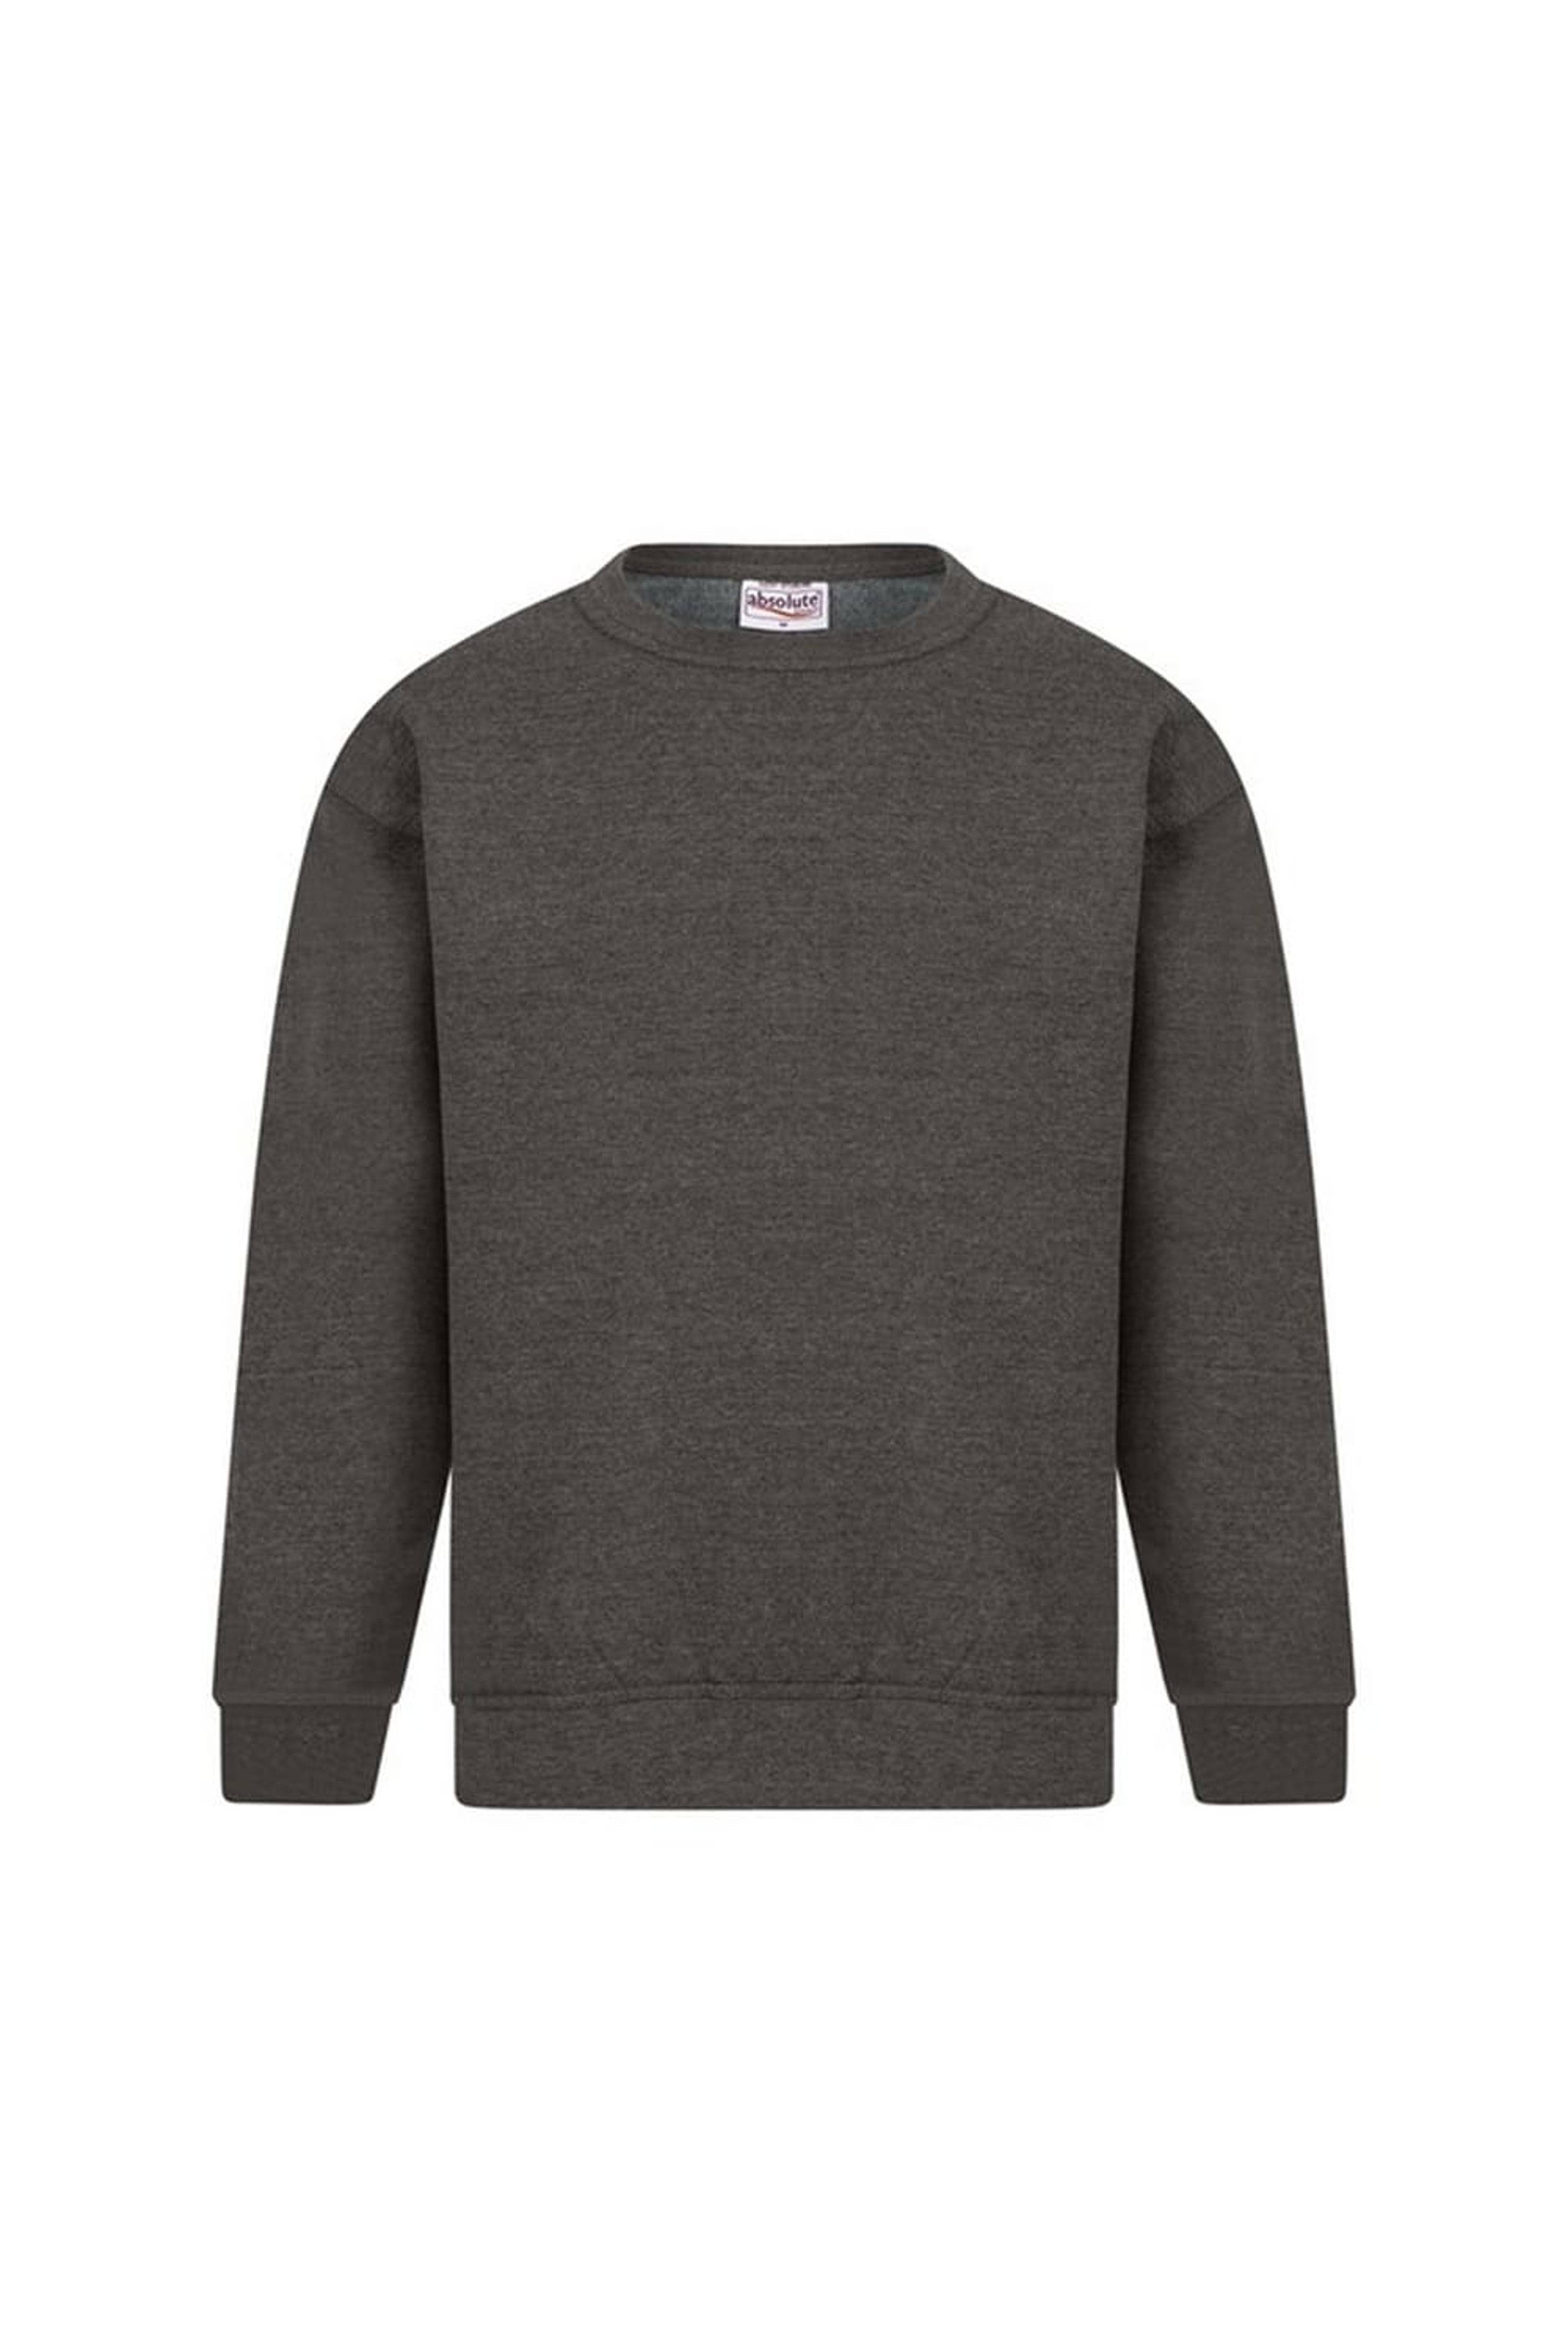 ABSOLUTE APPAREL ABSOLUTE APPAREL MENS STERLING SWEAT